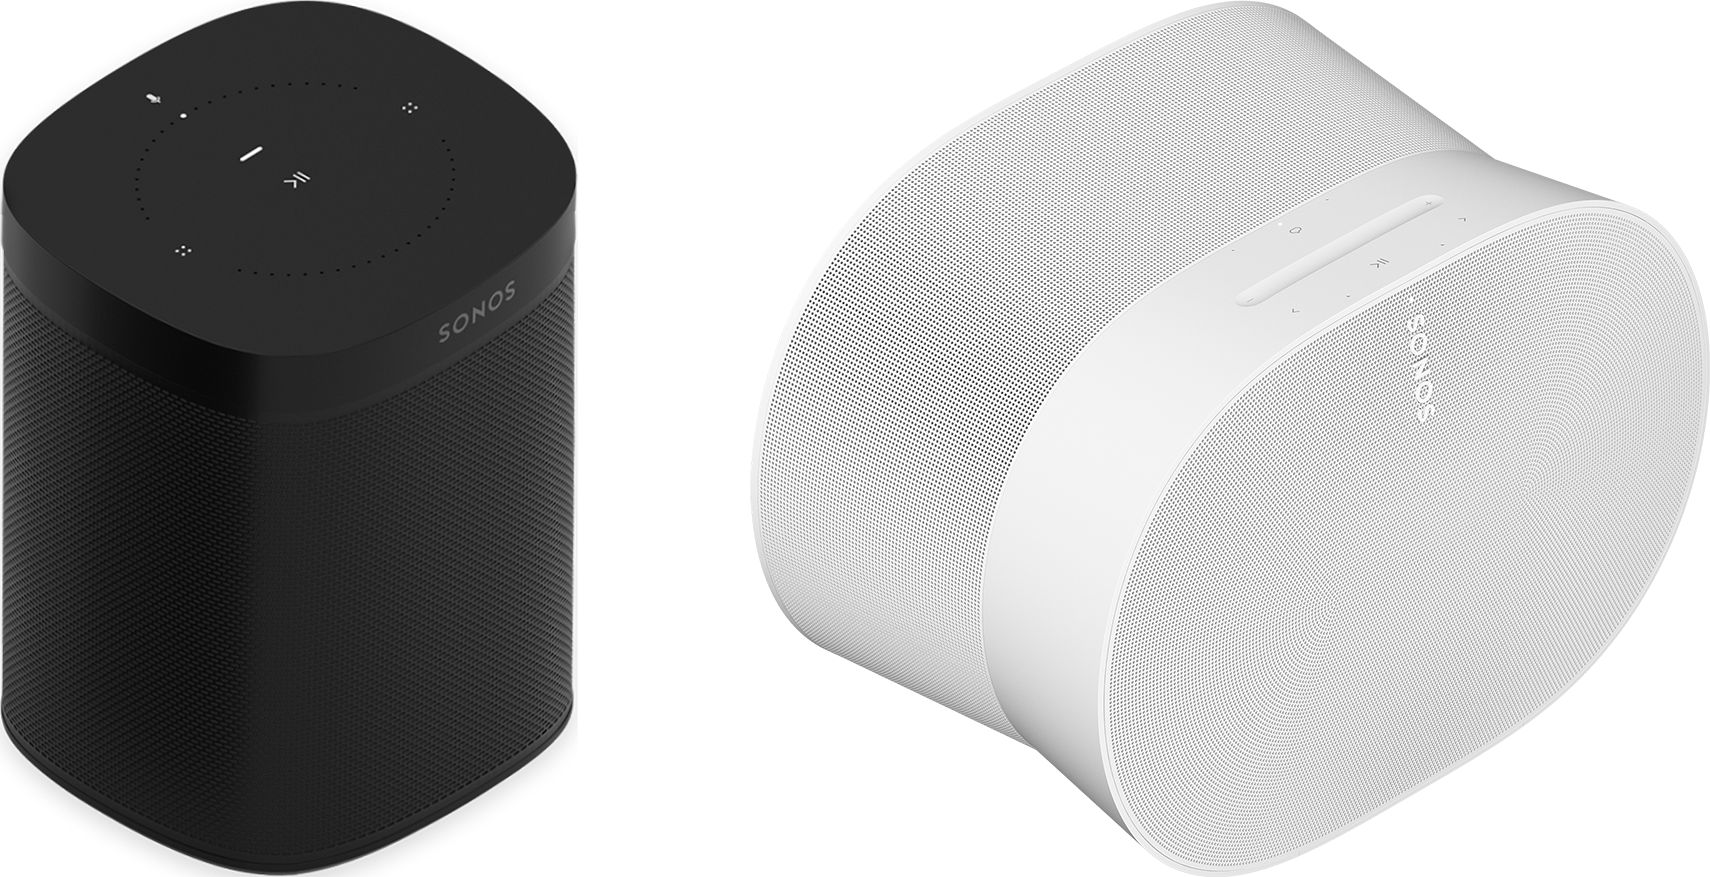 Sonos Era 100 and Era 300 – A redesigned Sonos One and an all-new spatial audio wireless speaker